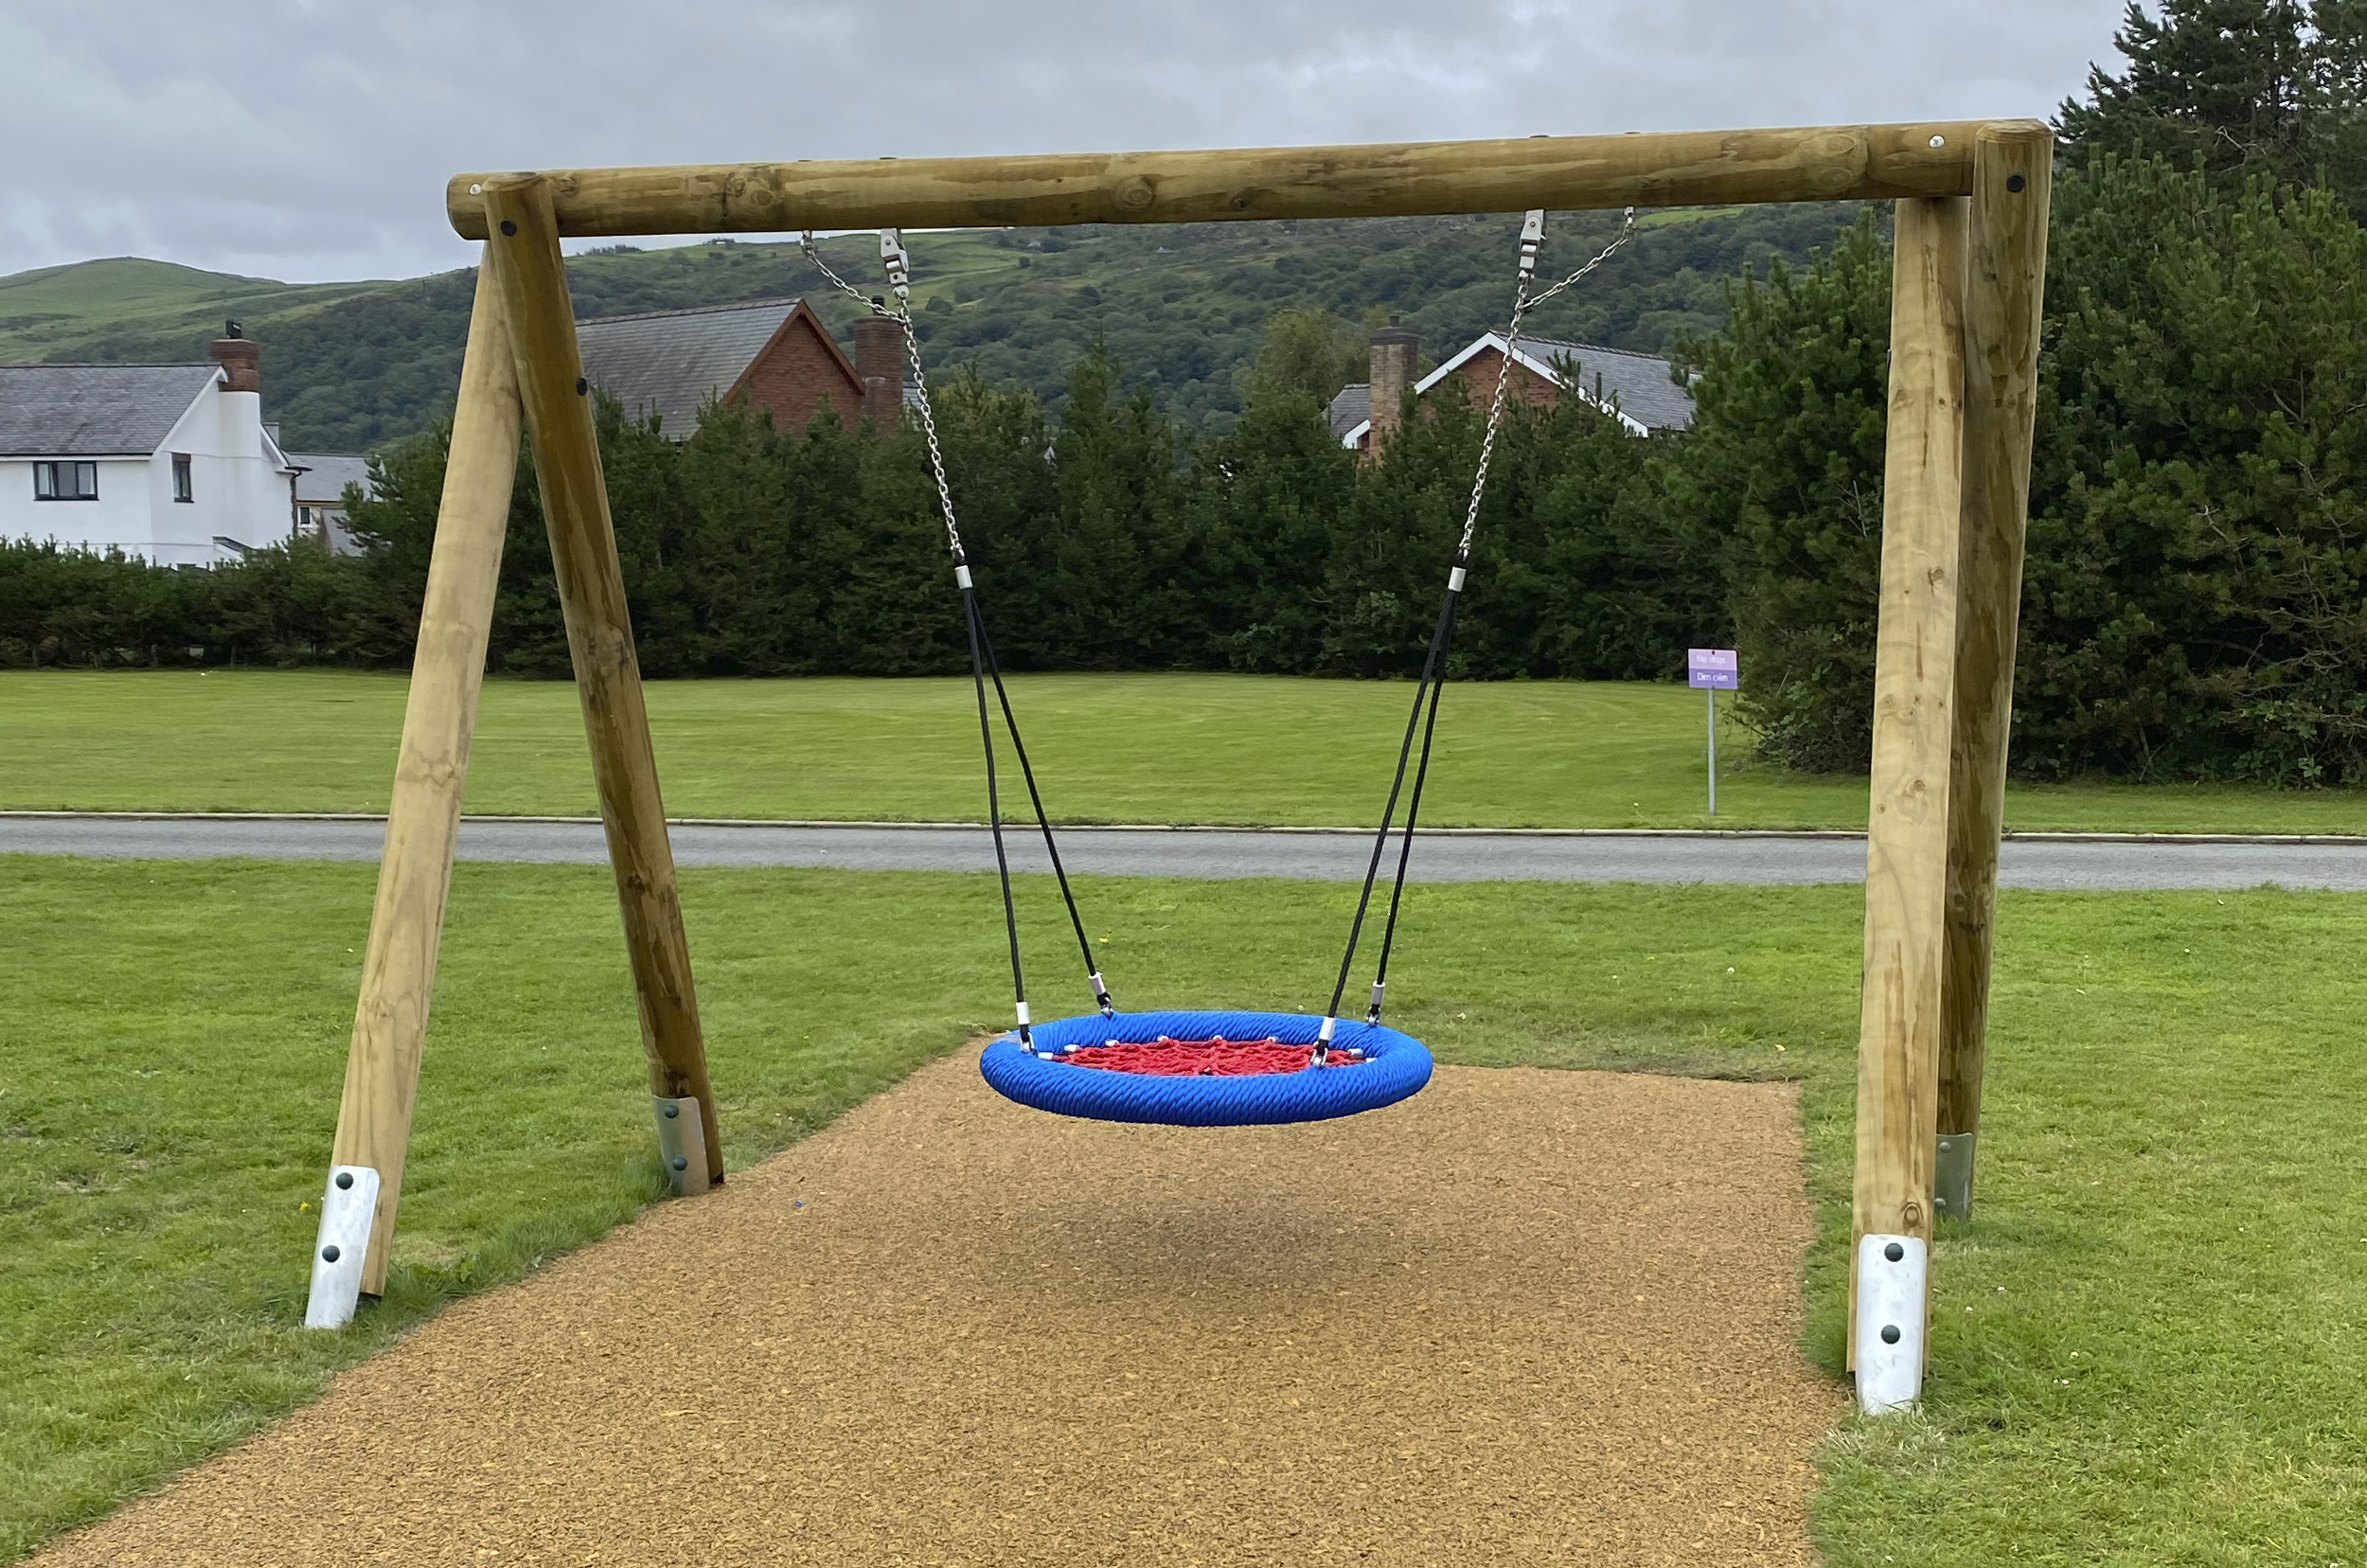 Timber Basket Swing - a timber swing frame holds a red and blue inclusive group basket with red ropes